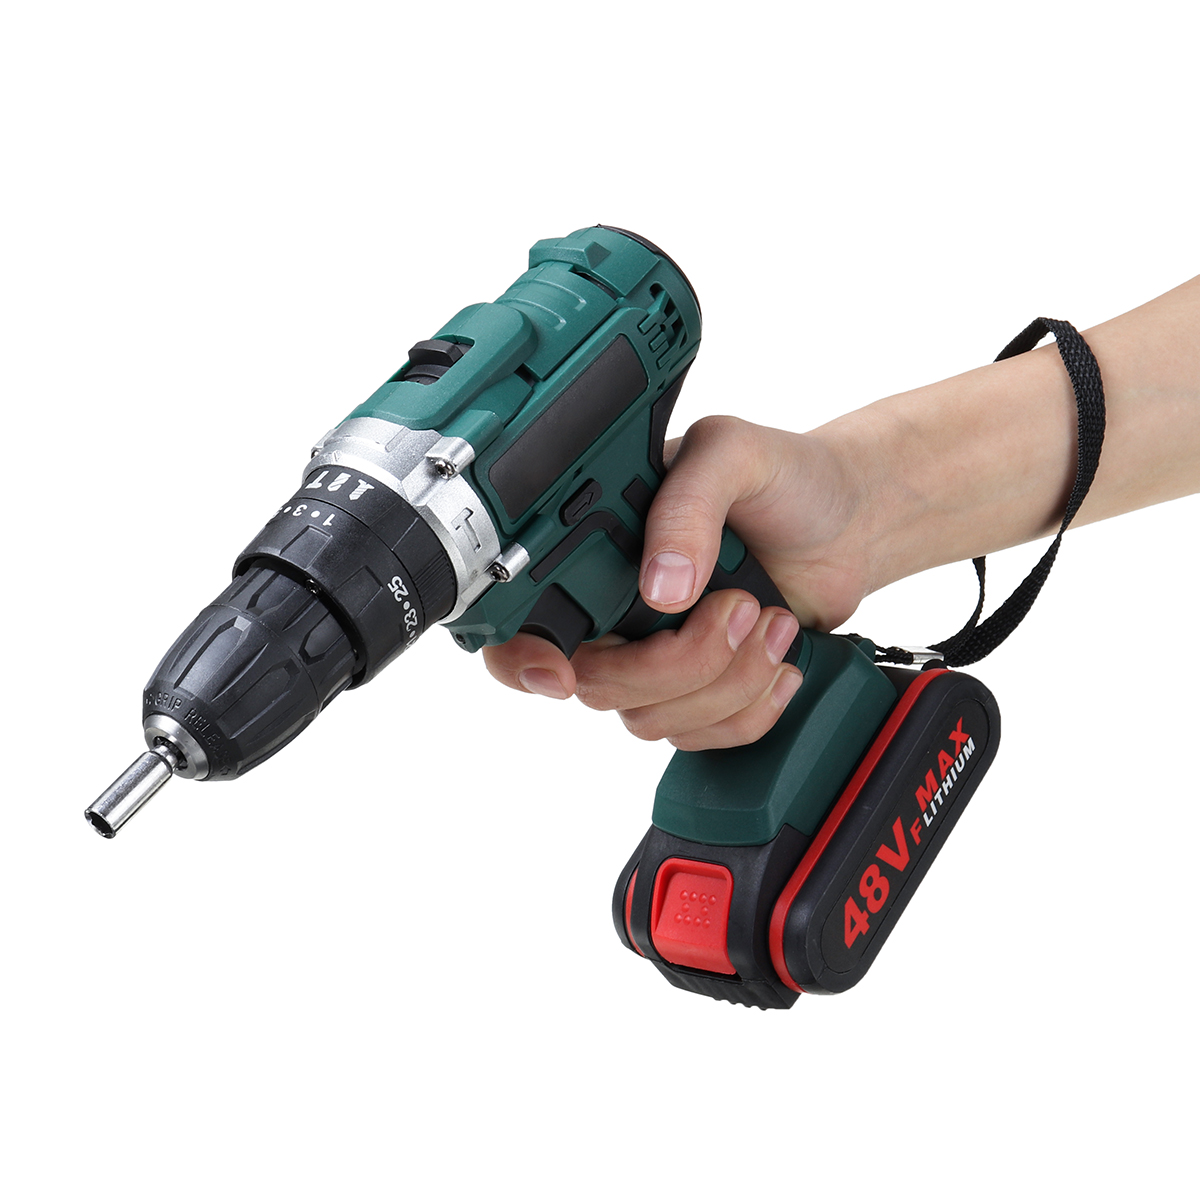 Cordless-Impact-Drill-Driver-HighLow-253-Gears-Speed-2-Battery-Set-1662831-10